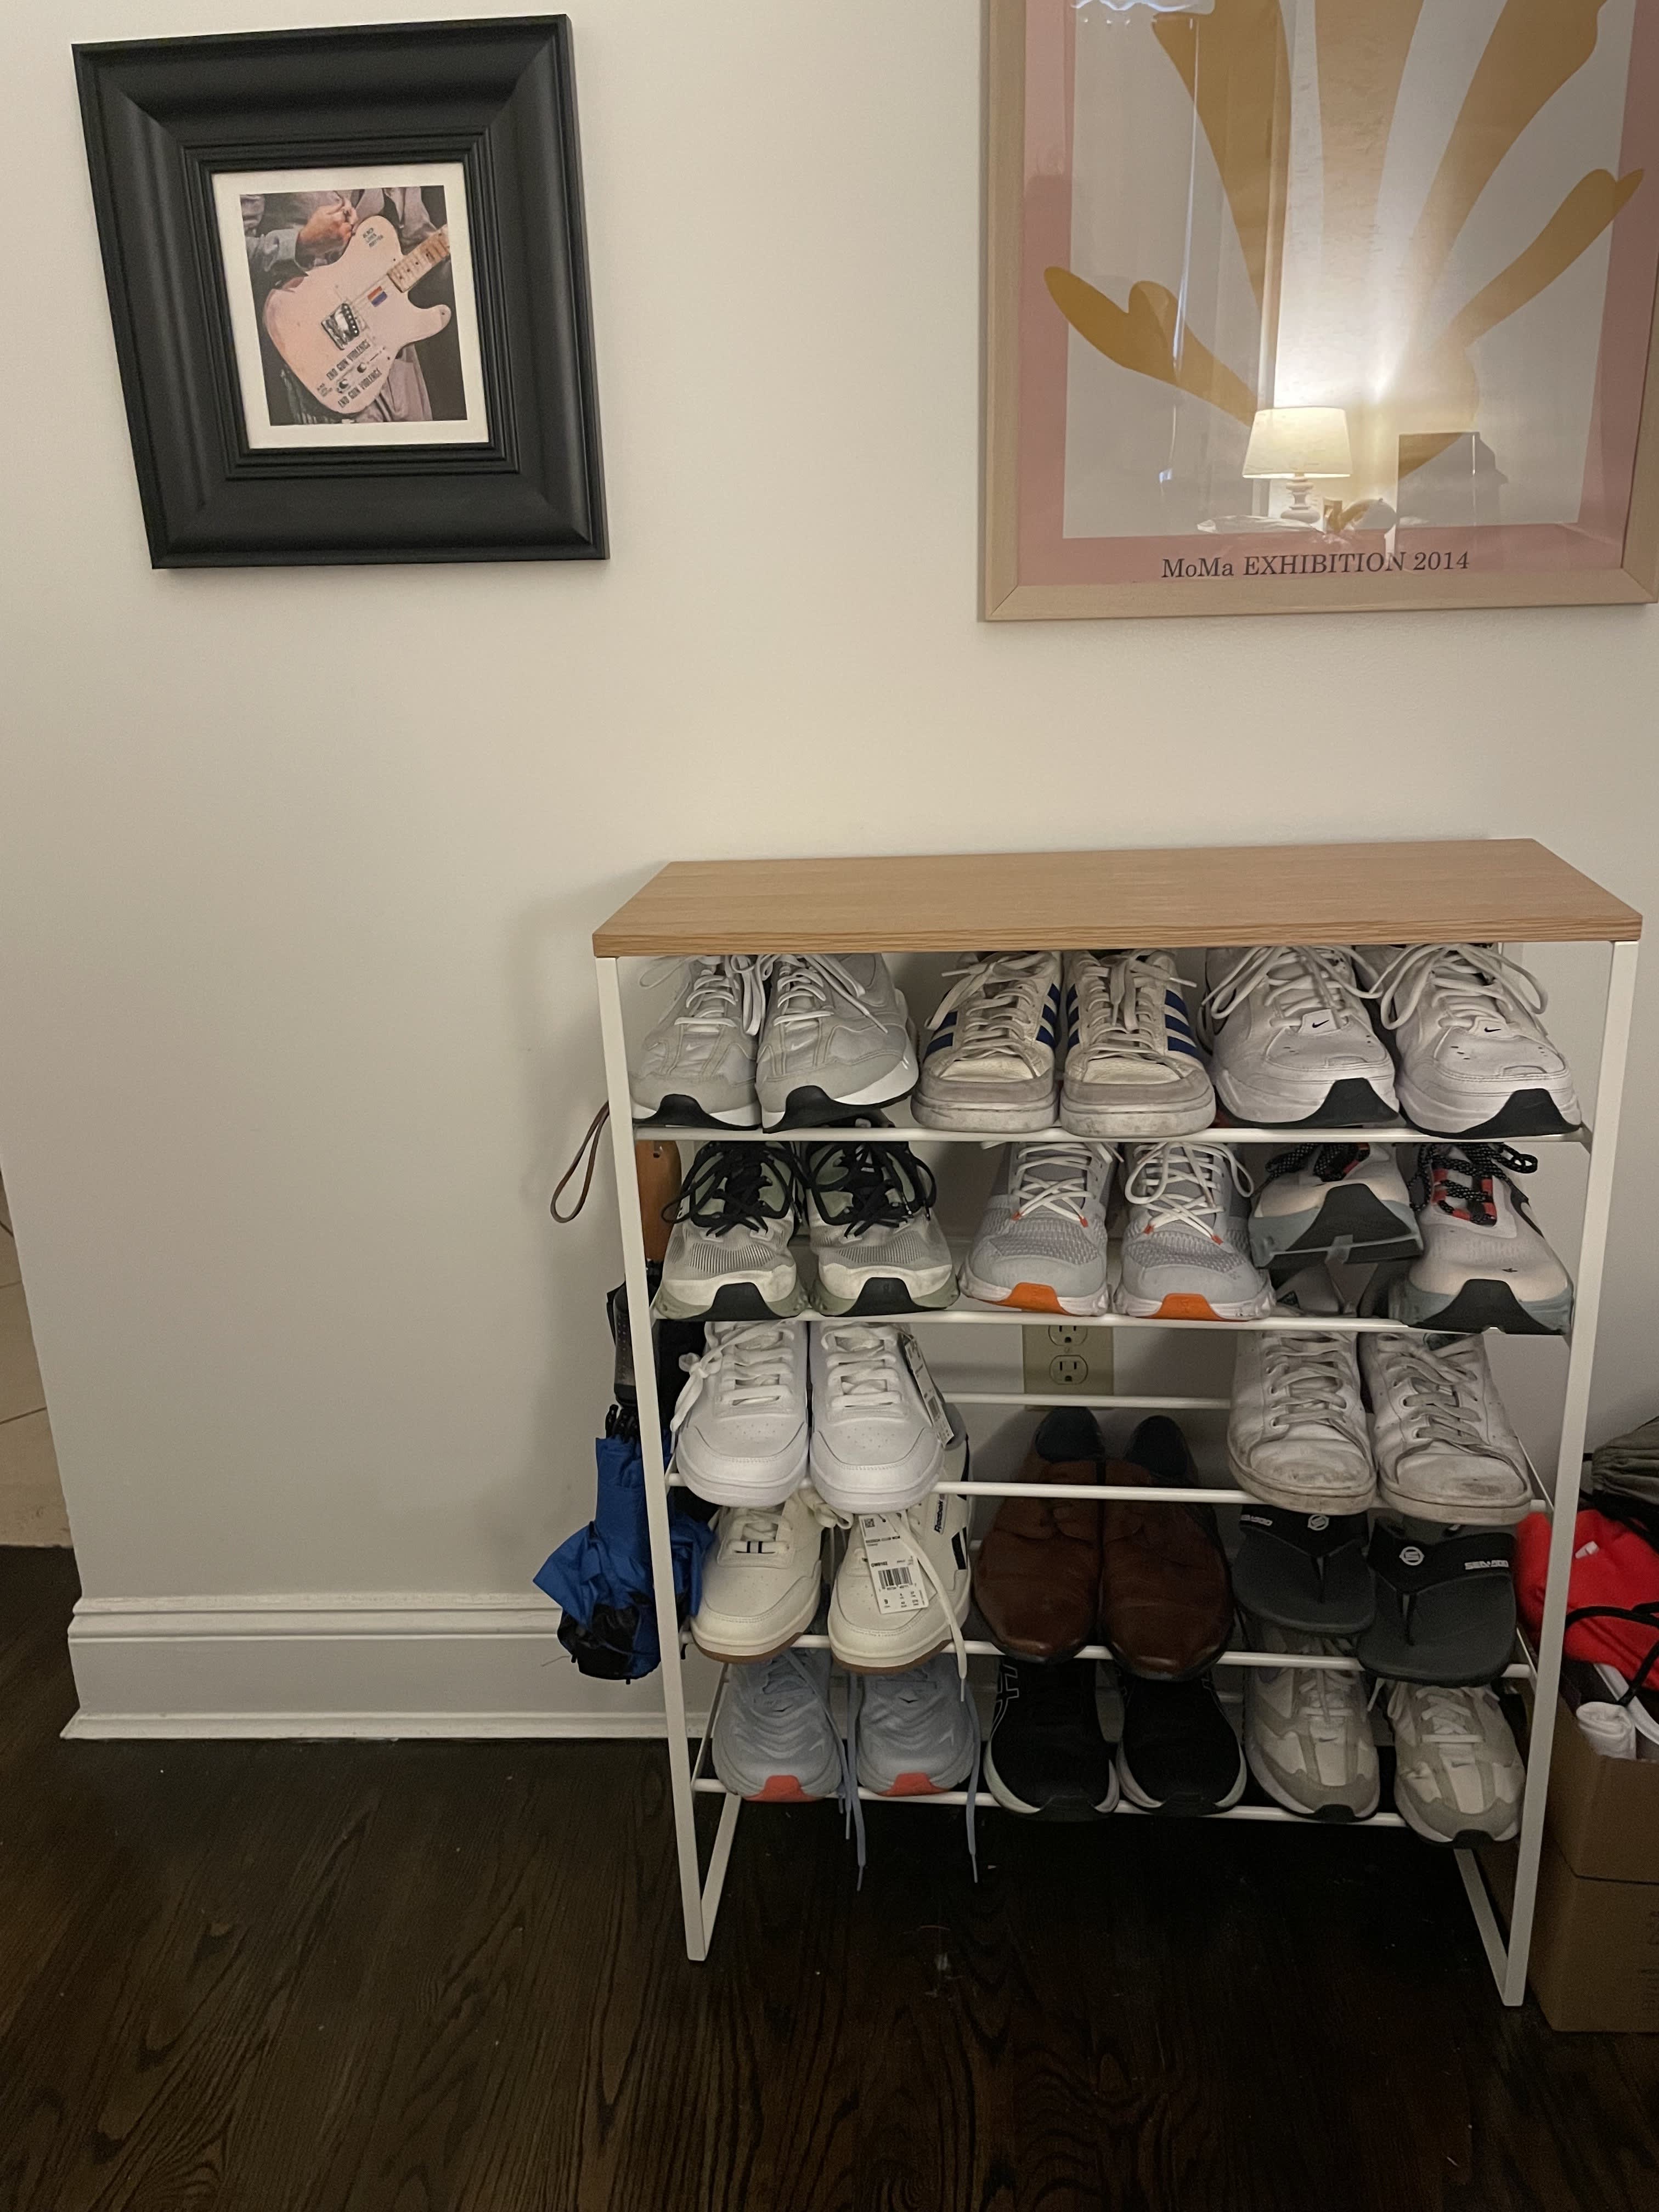 My ADHD life hack: put a clear shoe organizer in the bathroom for